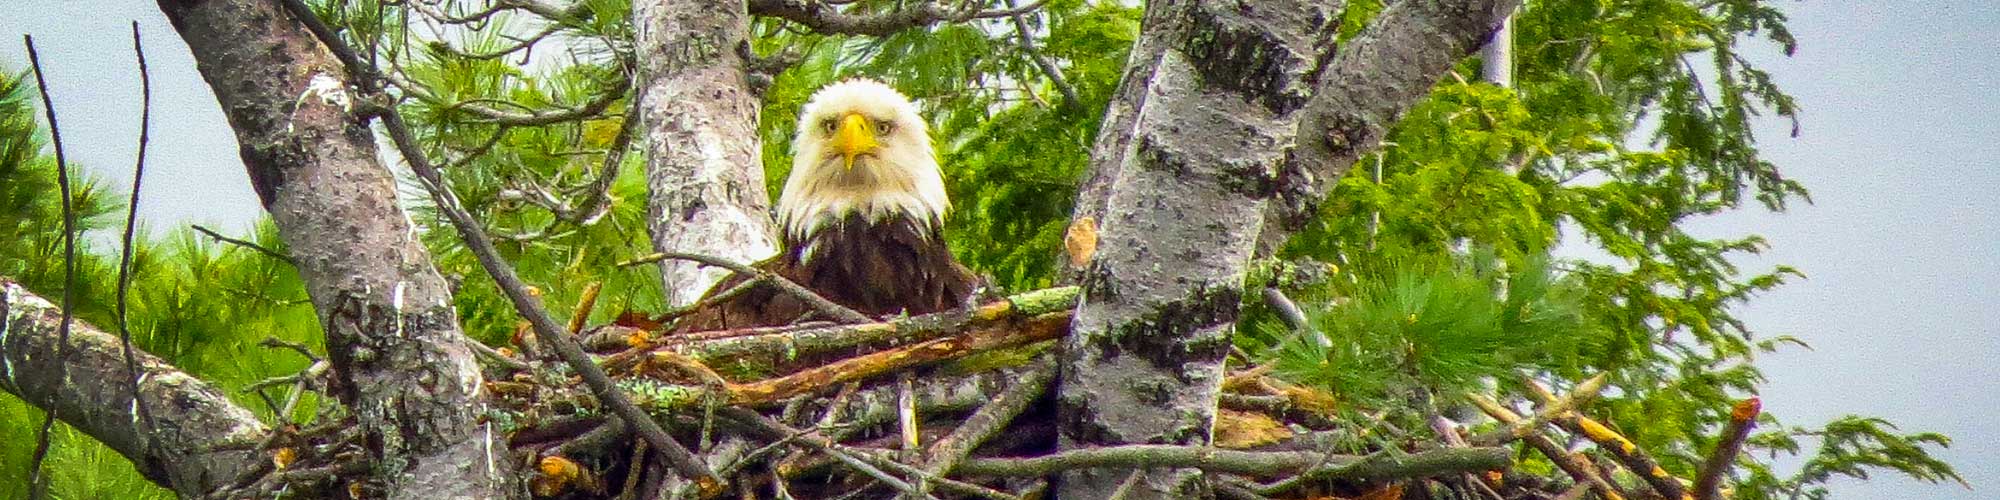 Bald Eagle sitting in a nest in a tree